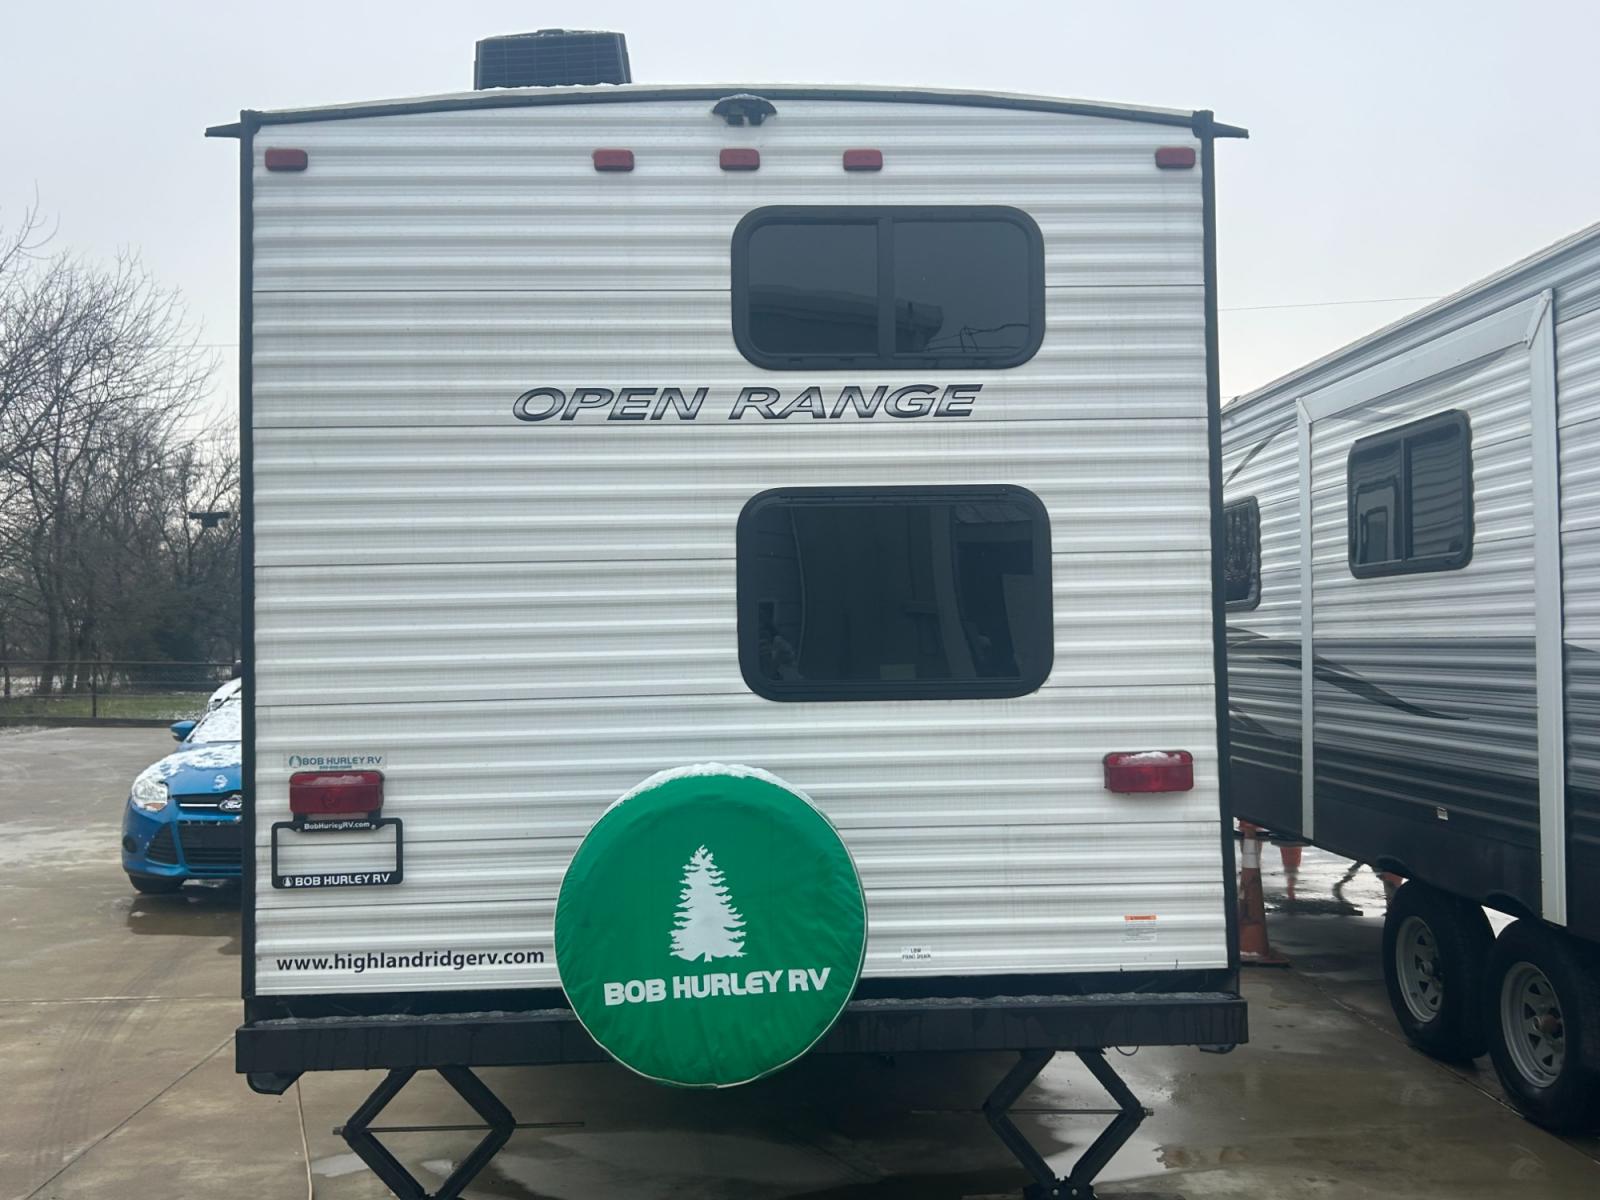 2021 White /TAN Highland Ridge RV, Inc OPEN RANGE 26BHS (58TBH0BP7M1) , located at 17760 Hwy 62, Morris, OK, 74445, 35.609104, -95.877060 - 2021 HIGHLAND RIDGE OPEN RANGE IS PERFECT FOR A SMALL FAMILY OR A LARGE. THIS CAMPER IS 30.5FT LONG AND WILL SLEEP 10 PEOPLE. FEATURES A 16FT POWER AWNING, OUTSIDE STORAGE, DOUBLE AXEL, SINGLE SLIDE OUT, POWER HITCH, AND MANUAL JACKS. IN THE FRONT OF THIS CAMPER IS A QUEEN SIZED BED WITH OVERHEAD ST - Photo #4